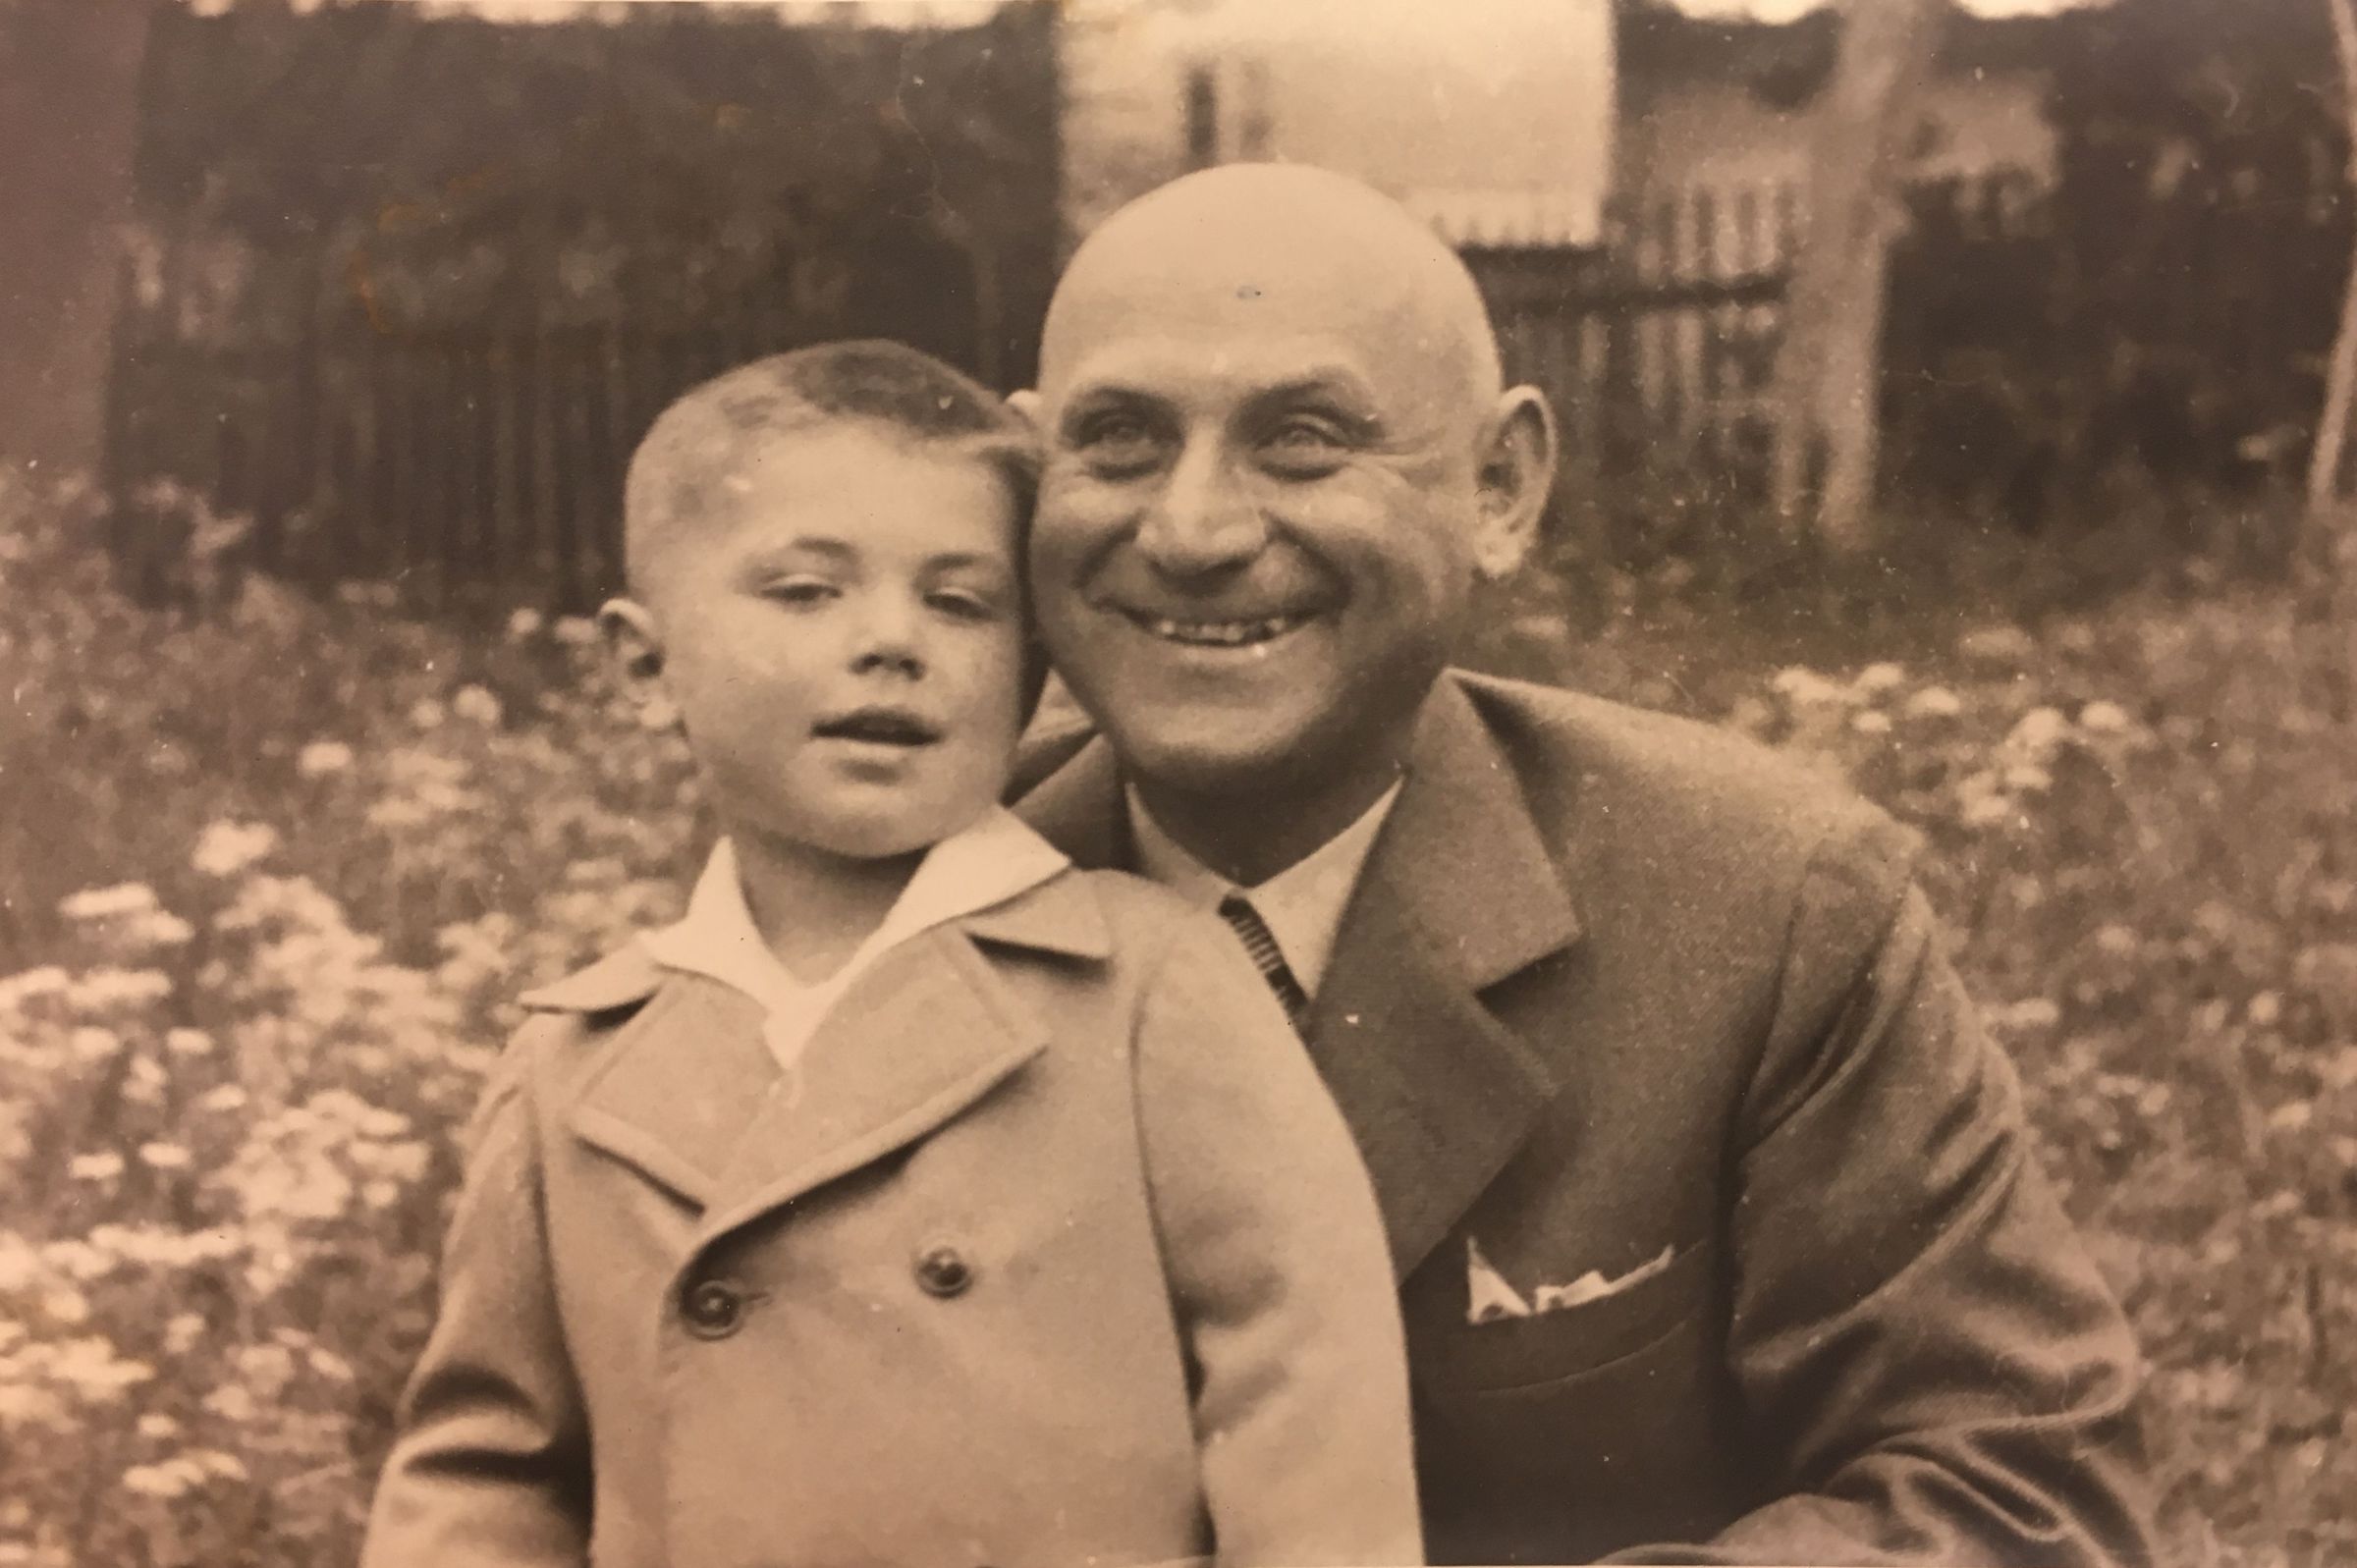 Milan with his grandfather